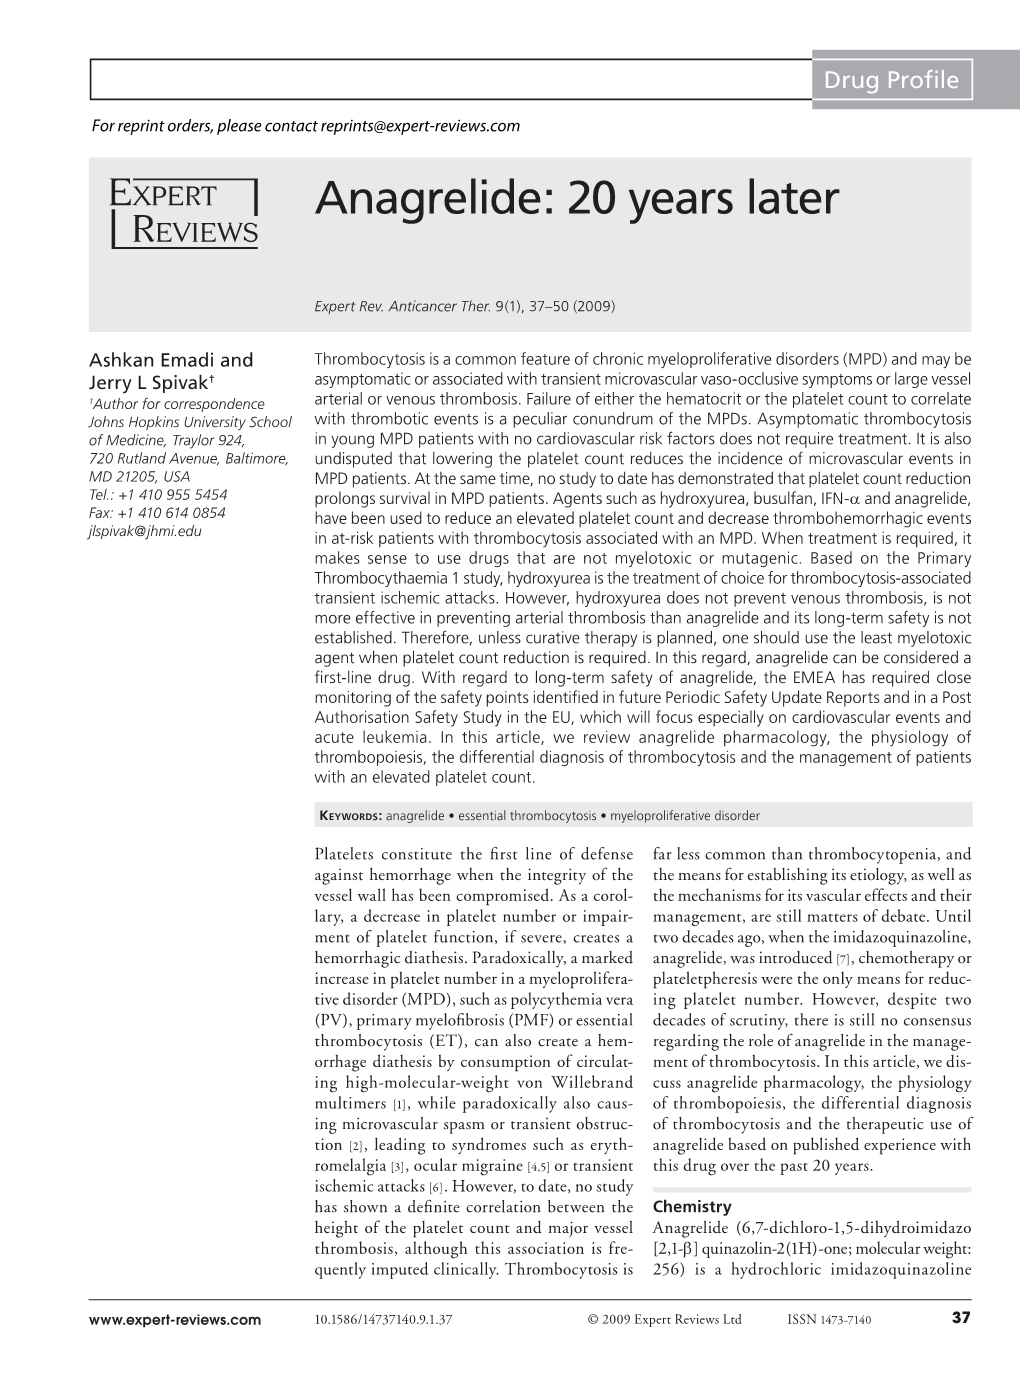 Anagrelide: 20 Years Later